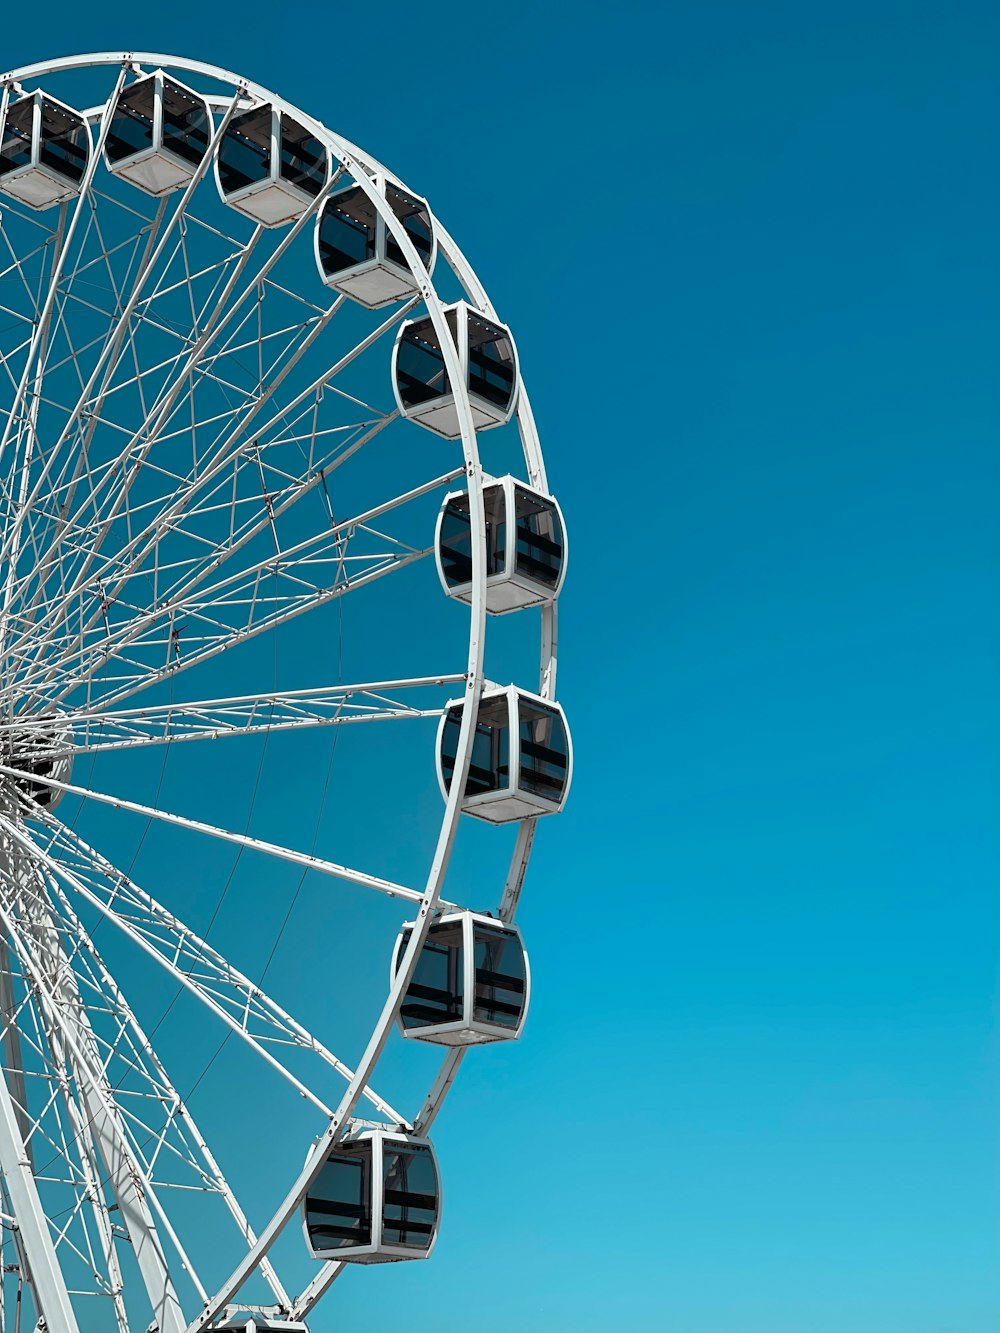 a large white ferris wheel on a clear day